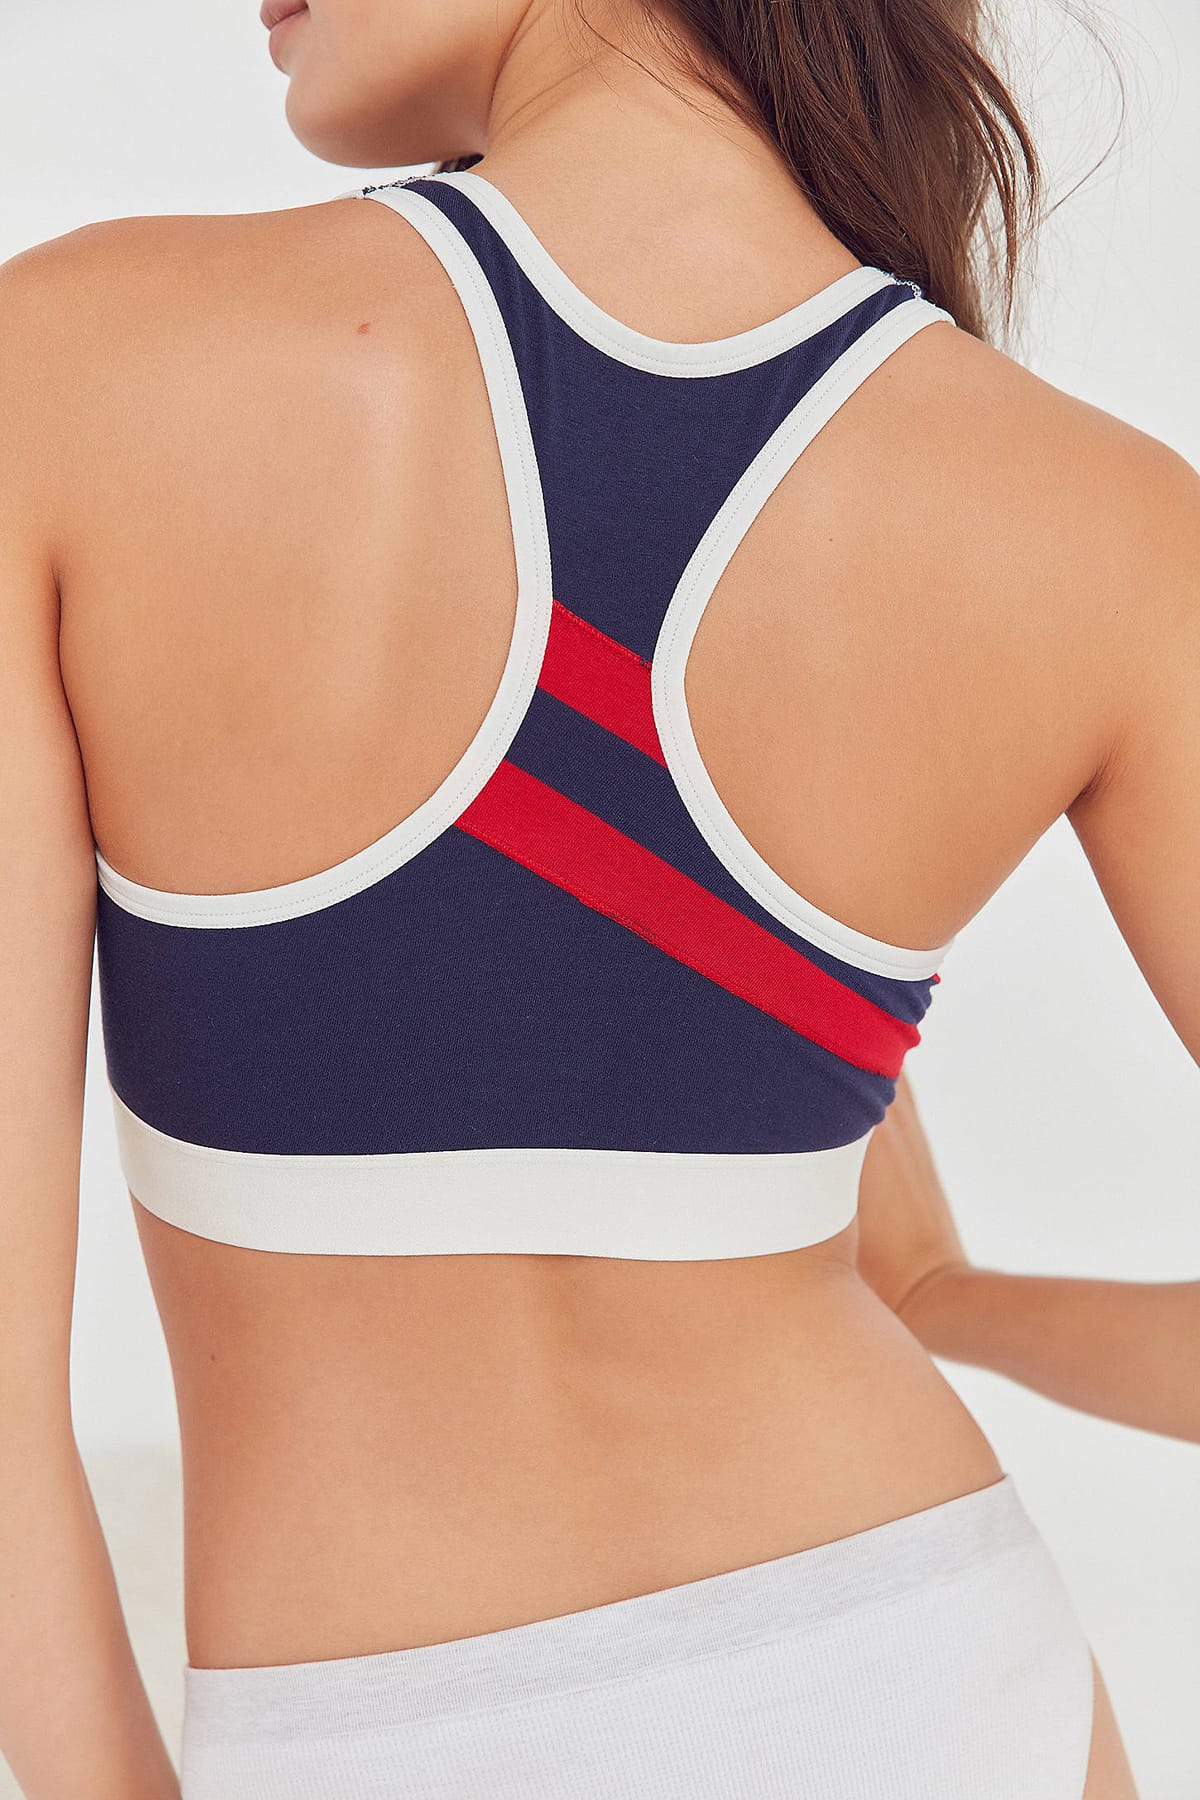 tommy hilfiger bralette urban outfitters